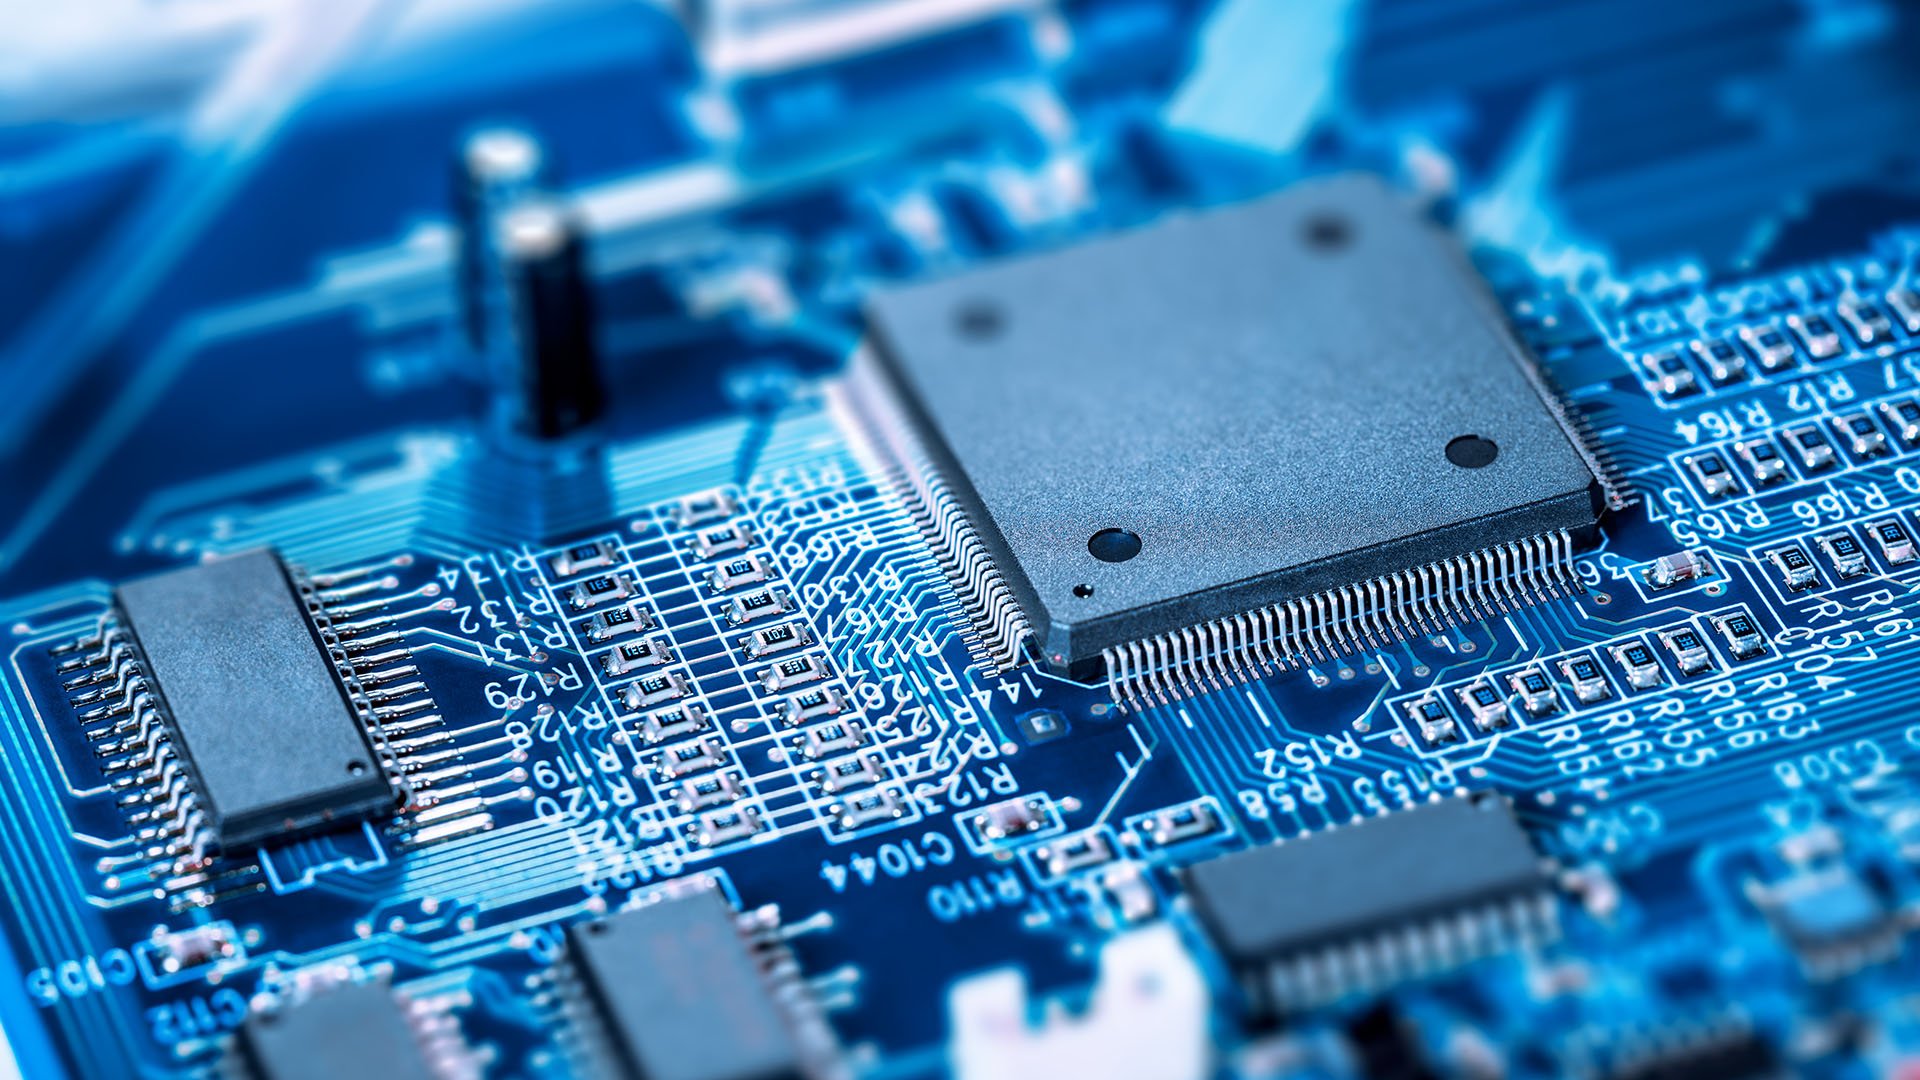 A close-up of a motherboard and circuit board with a microprocessor chip embedded. 